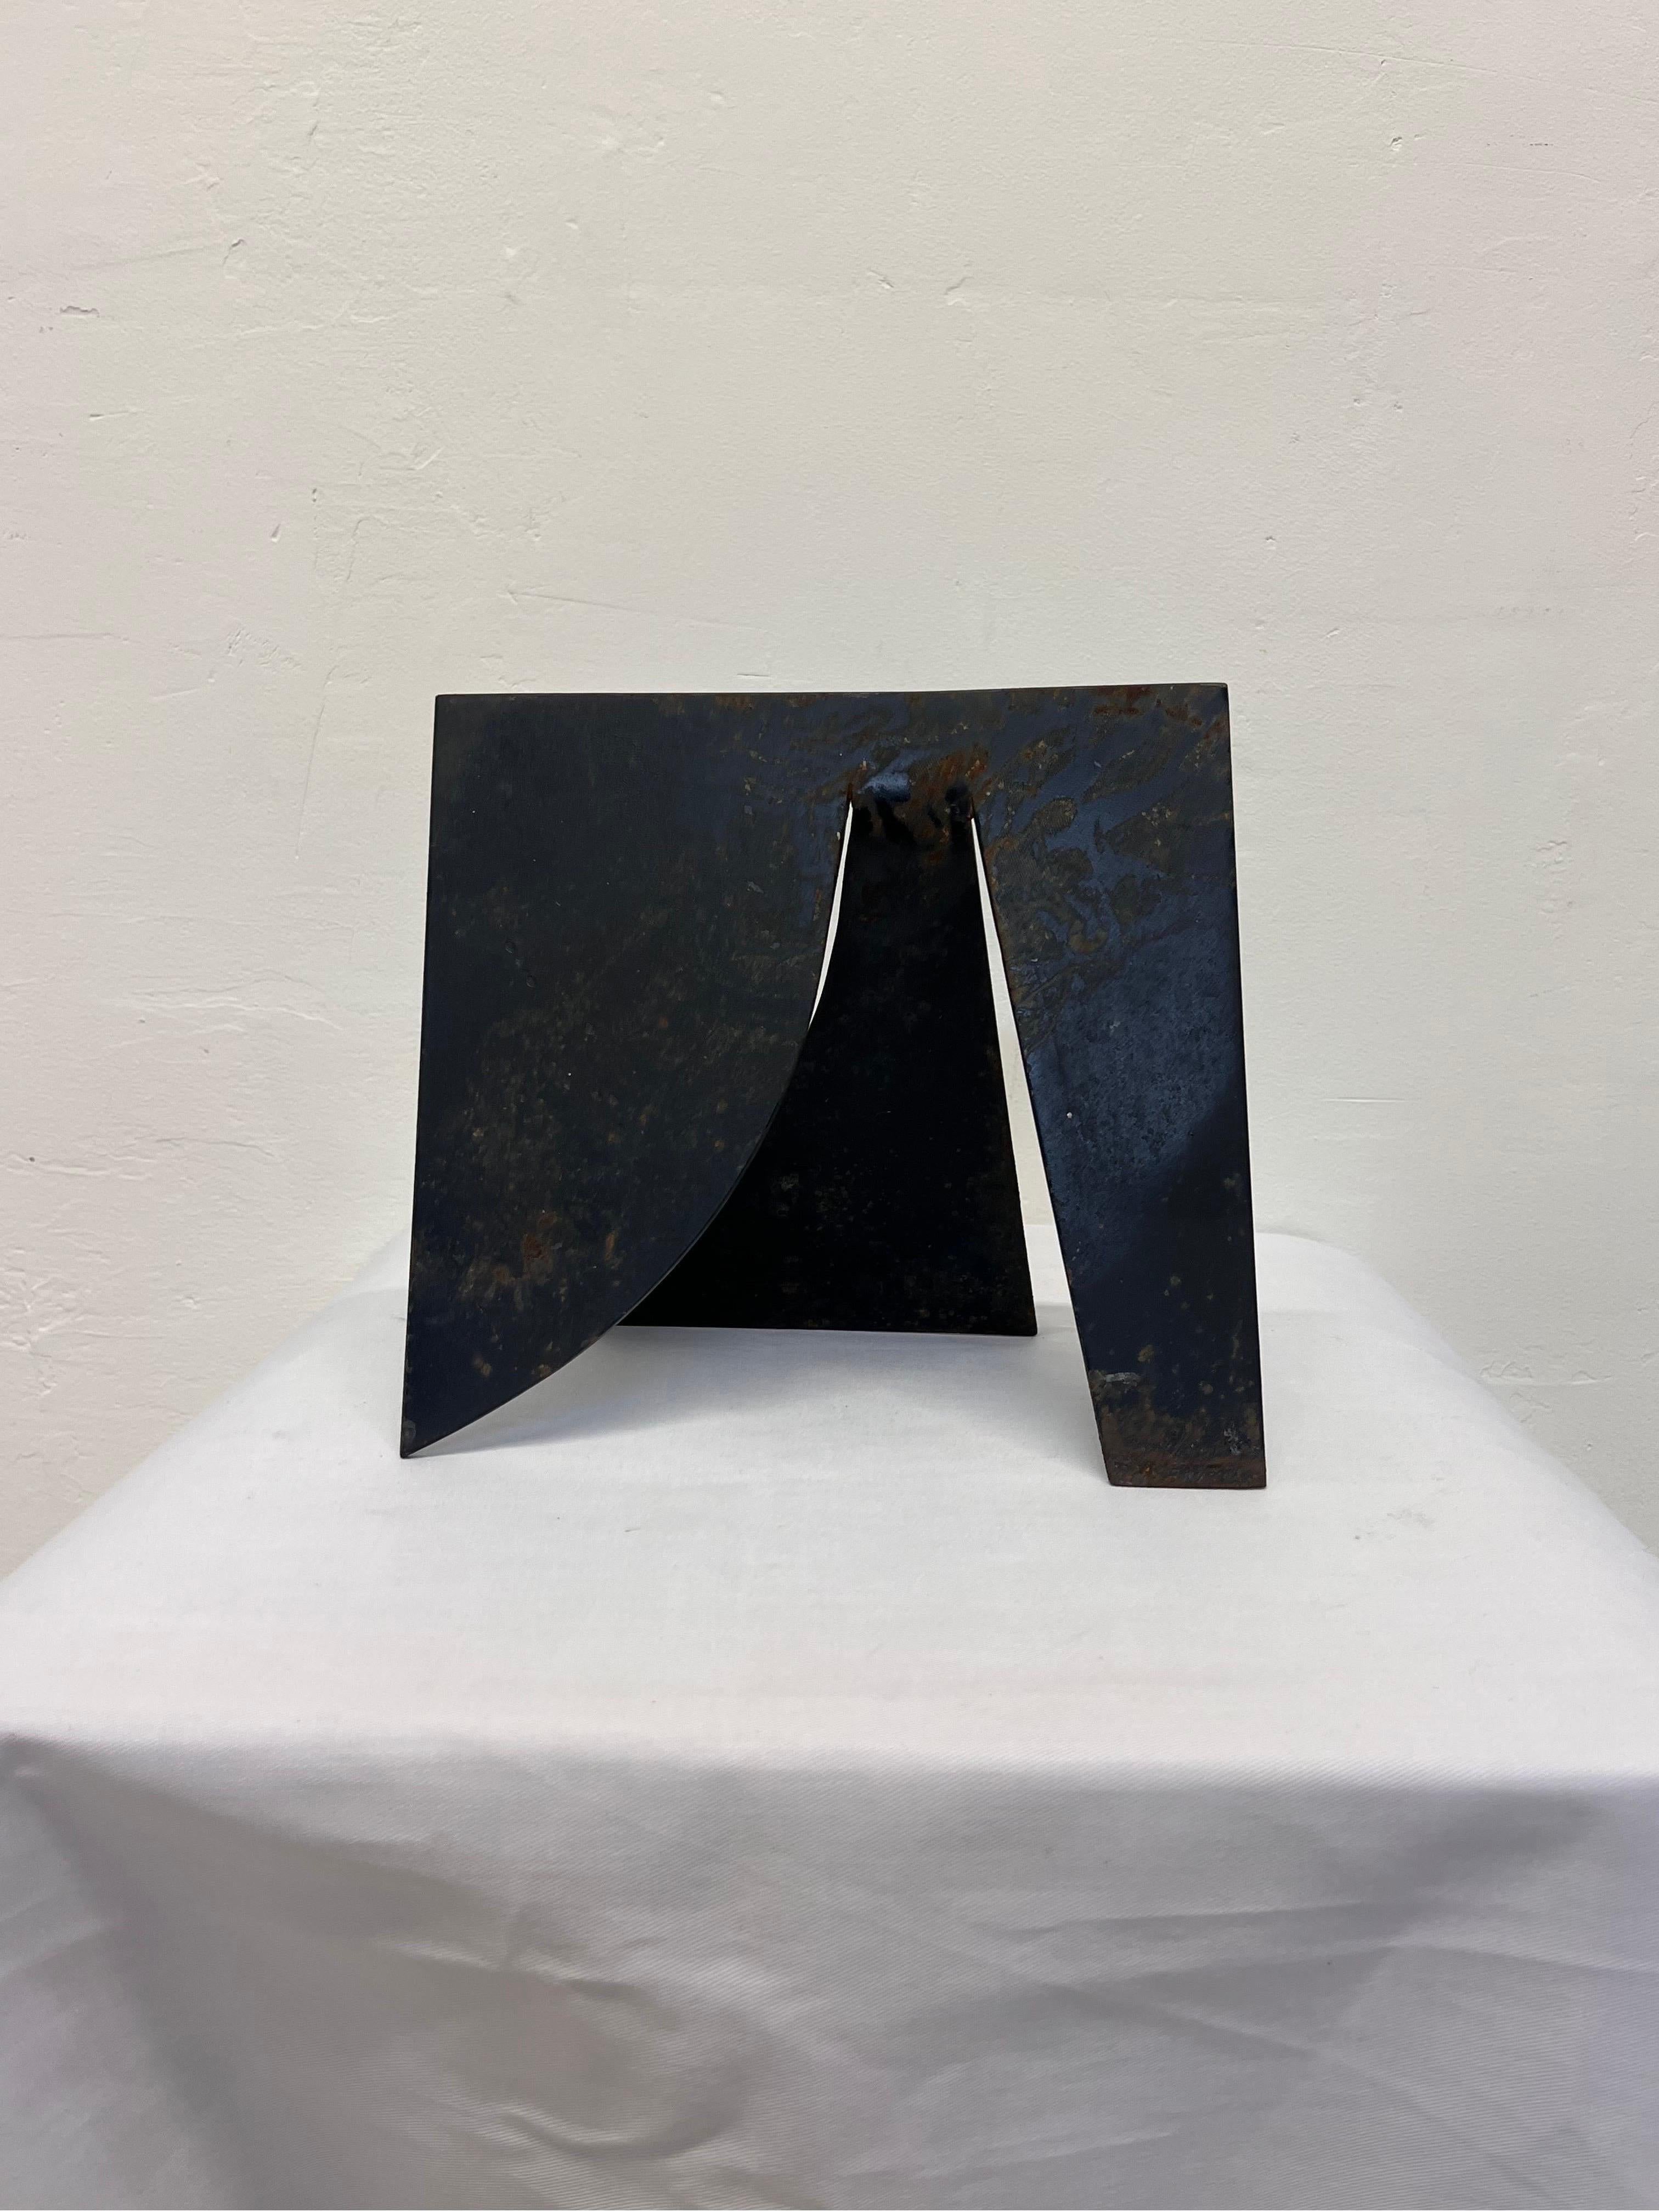 Brazilian Modern Black Steel Abstract Table Sculpture, 1980s For Sale 7